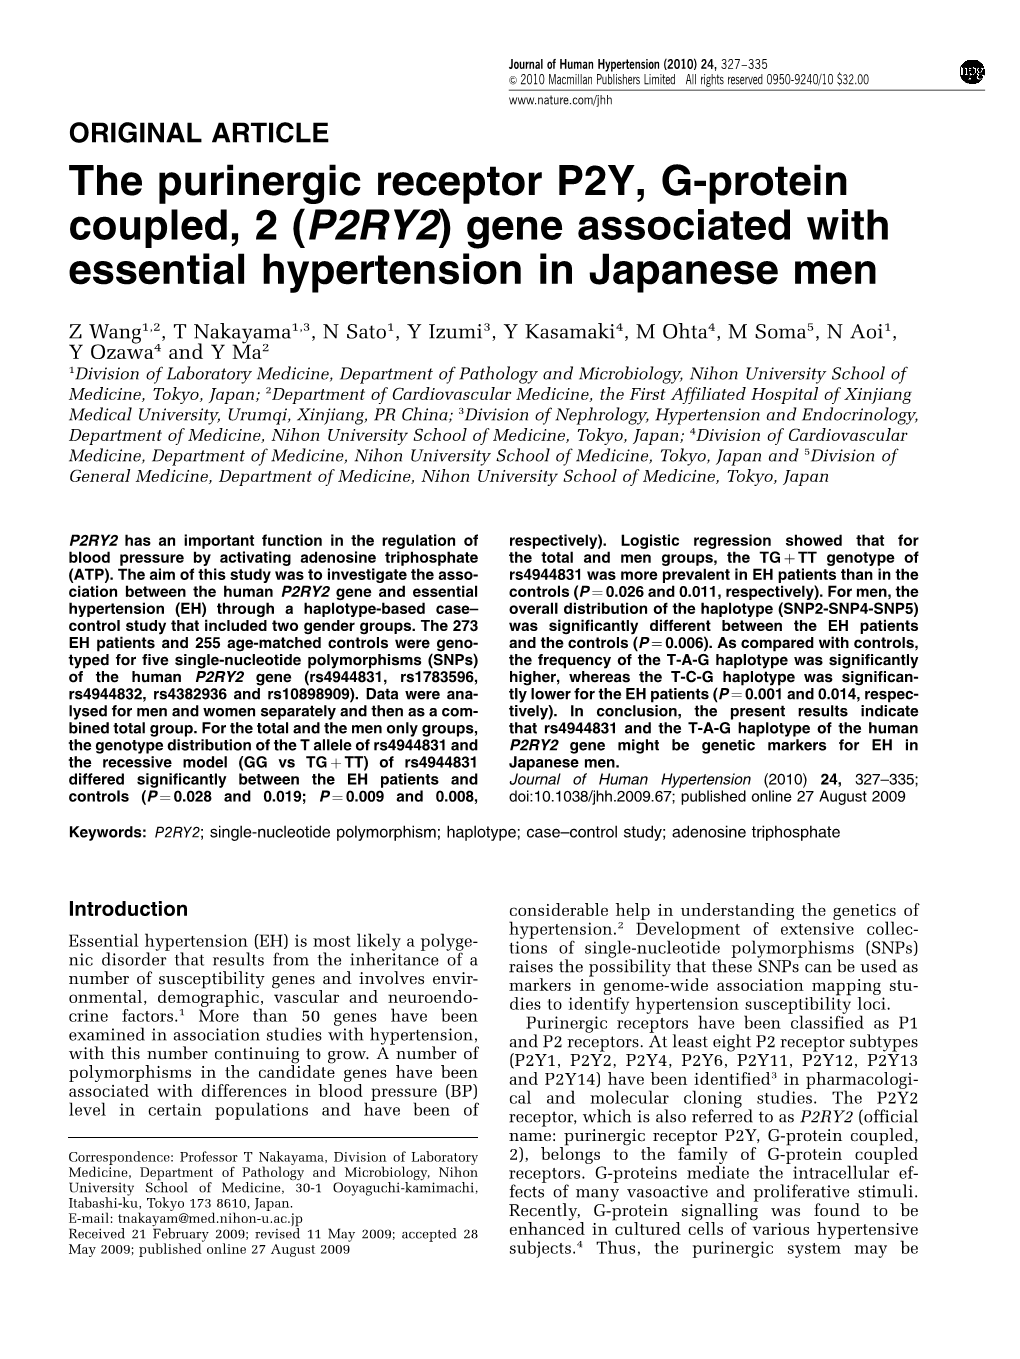 The Purinergic Receptor P2Y, G-Protein Coupled, 2 (P2RY2) Gene Associated with Essential Hypertension in Japanese Men